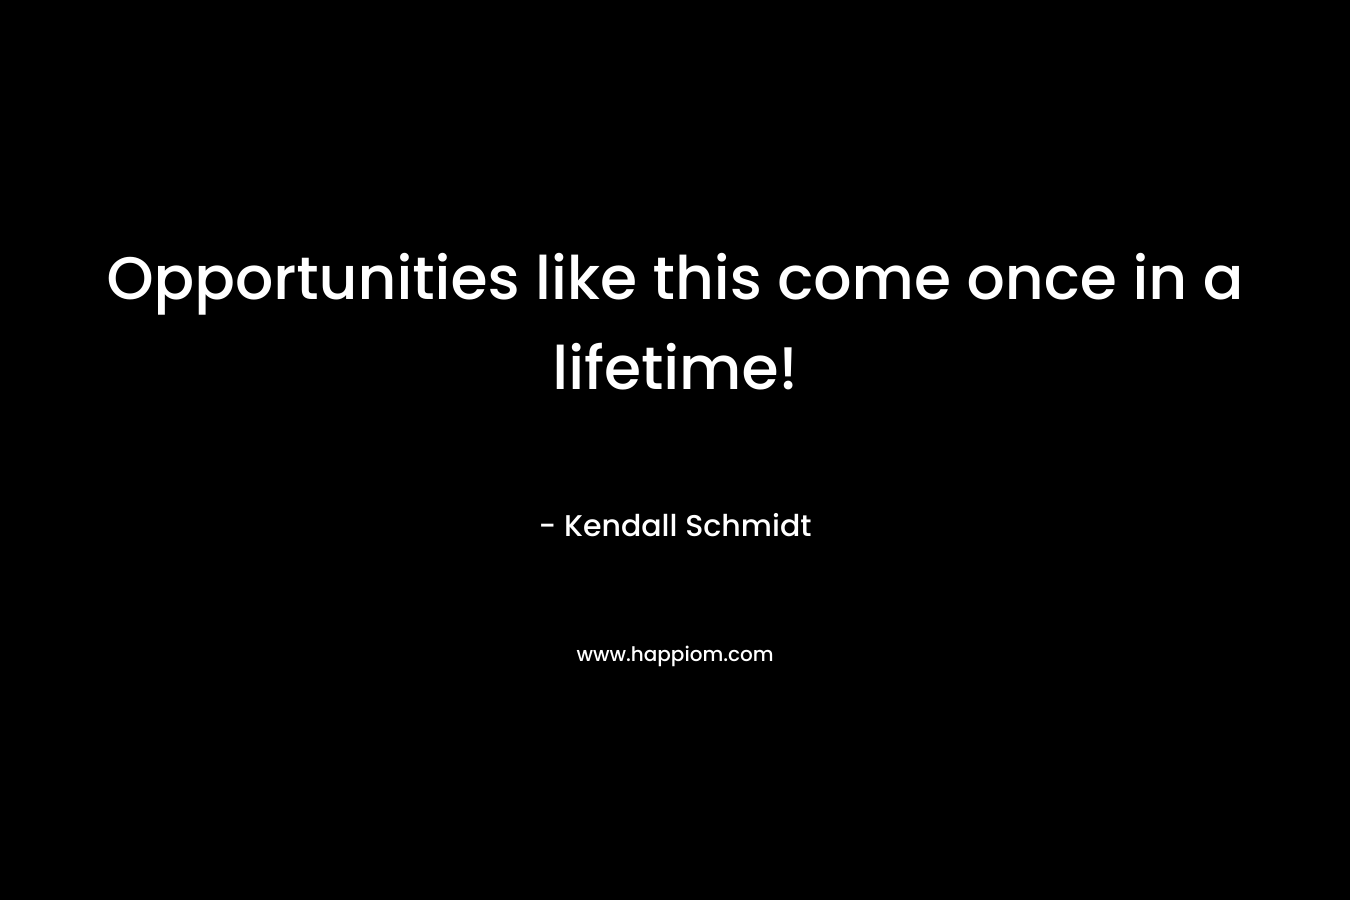 Opportunities like this come once in a lifetime! – Kendall Schmidt